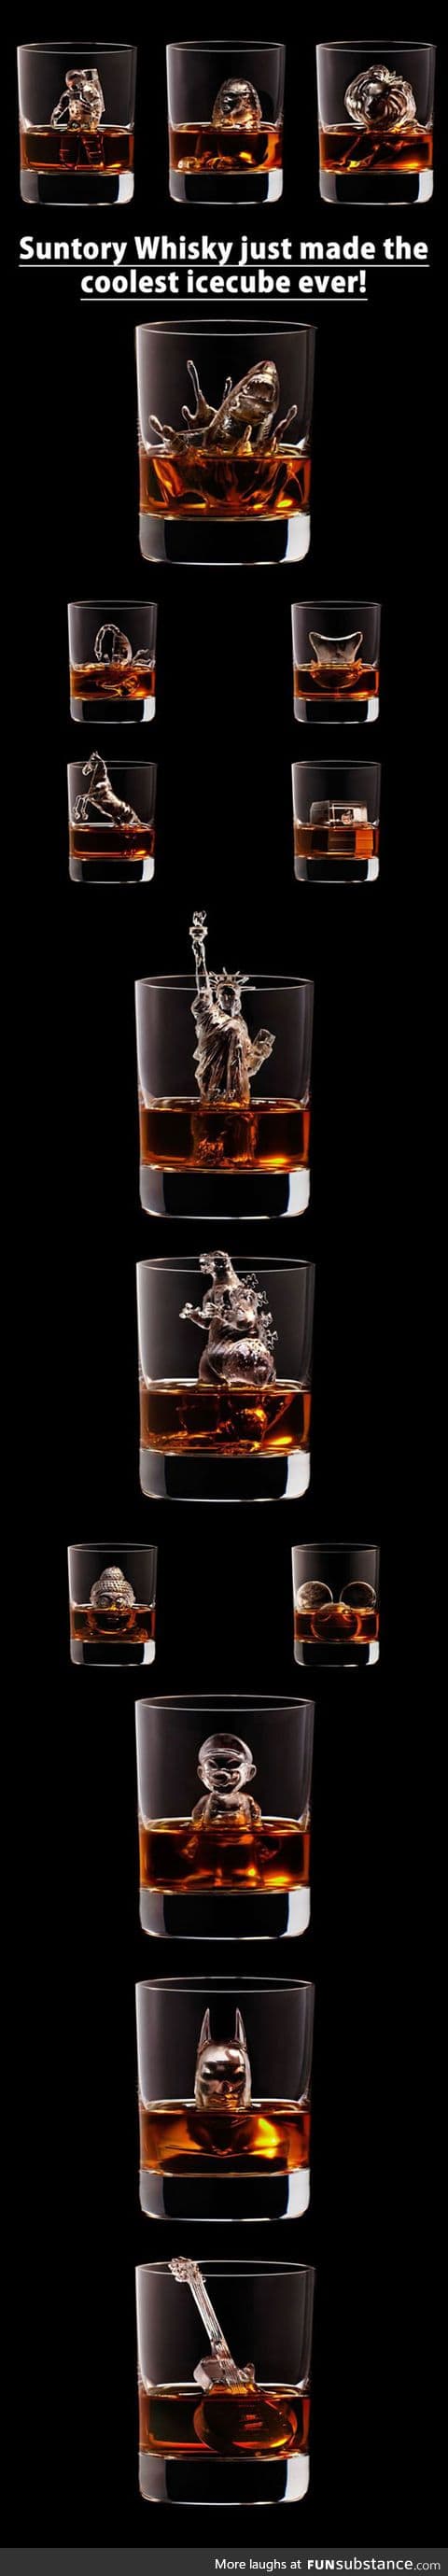 The coolest ice cube ever